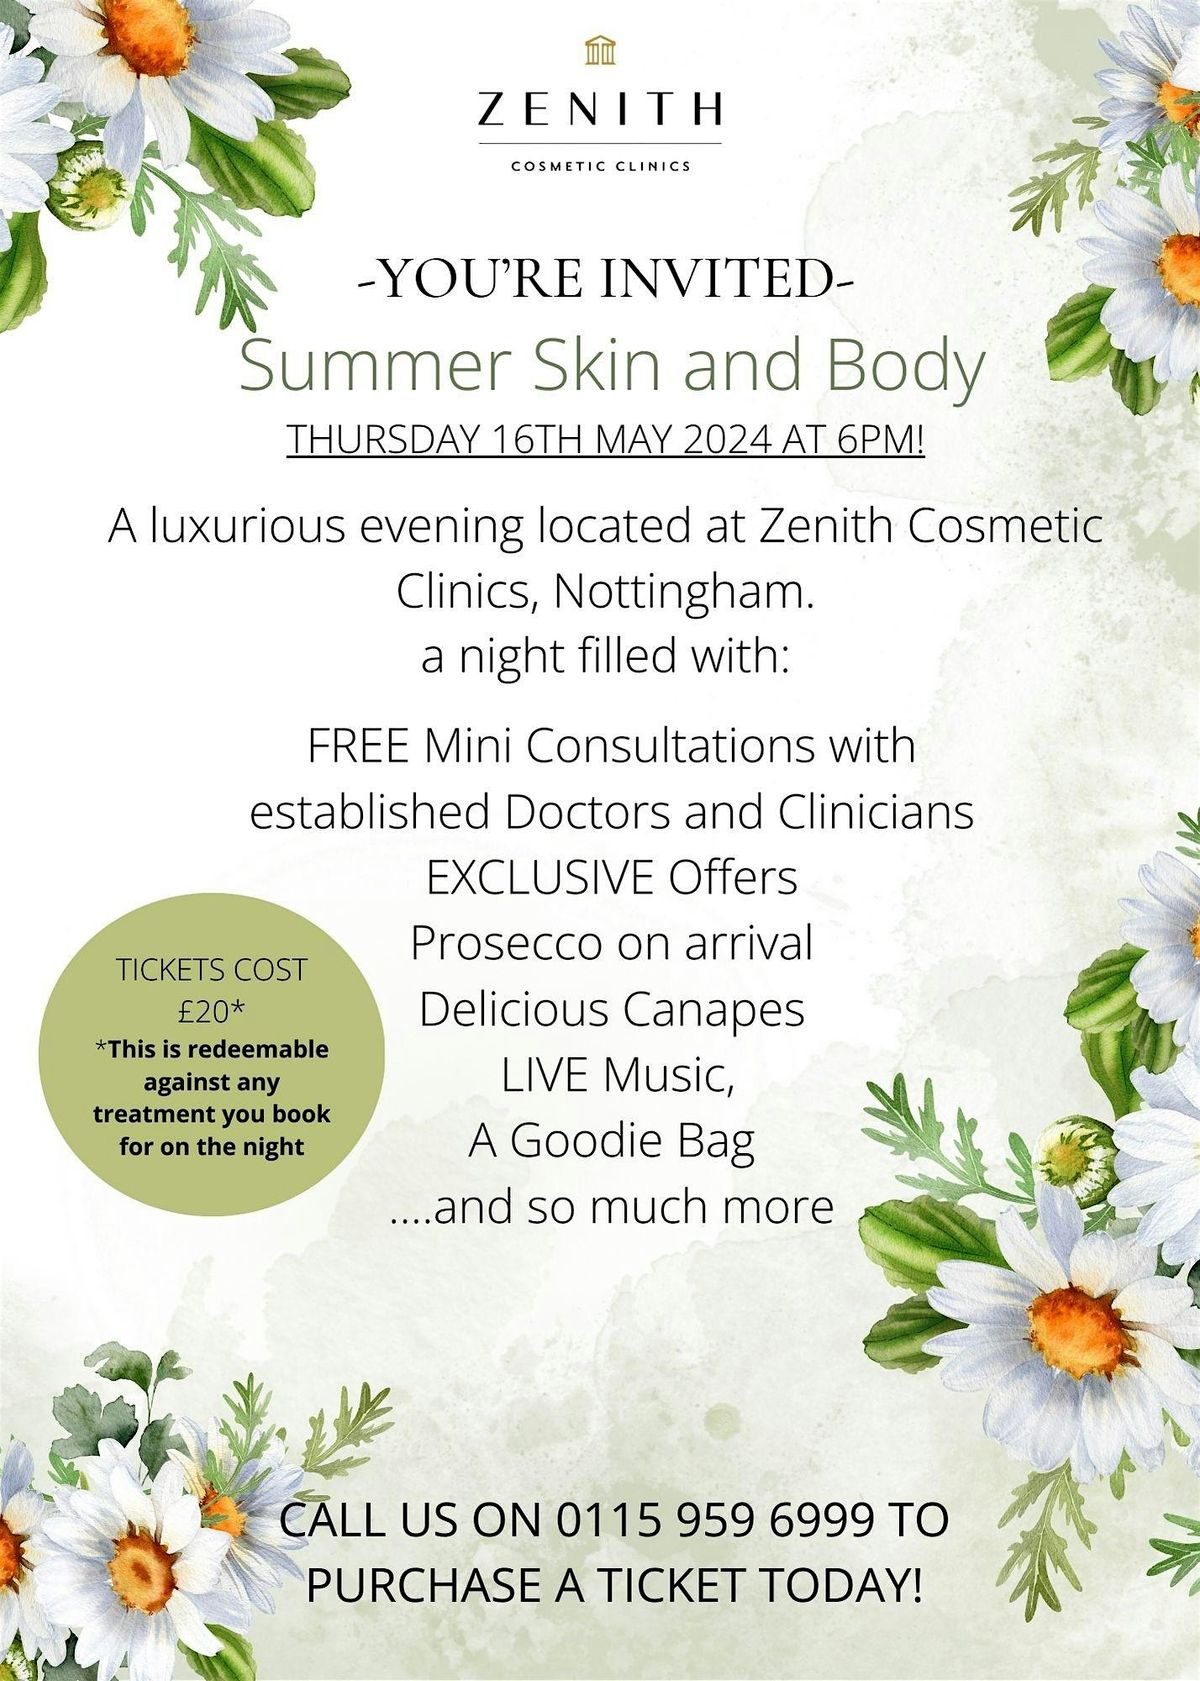 Summer Skin and Body Event at Zenith Cosmetics Clinic